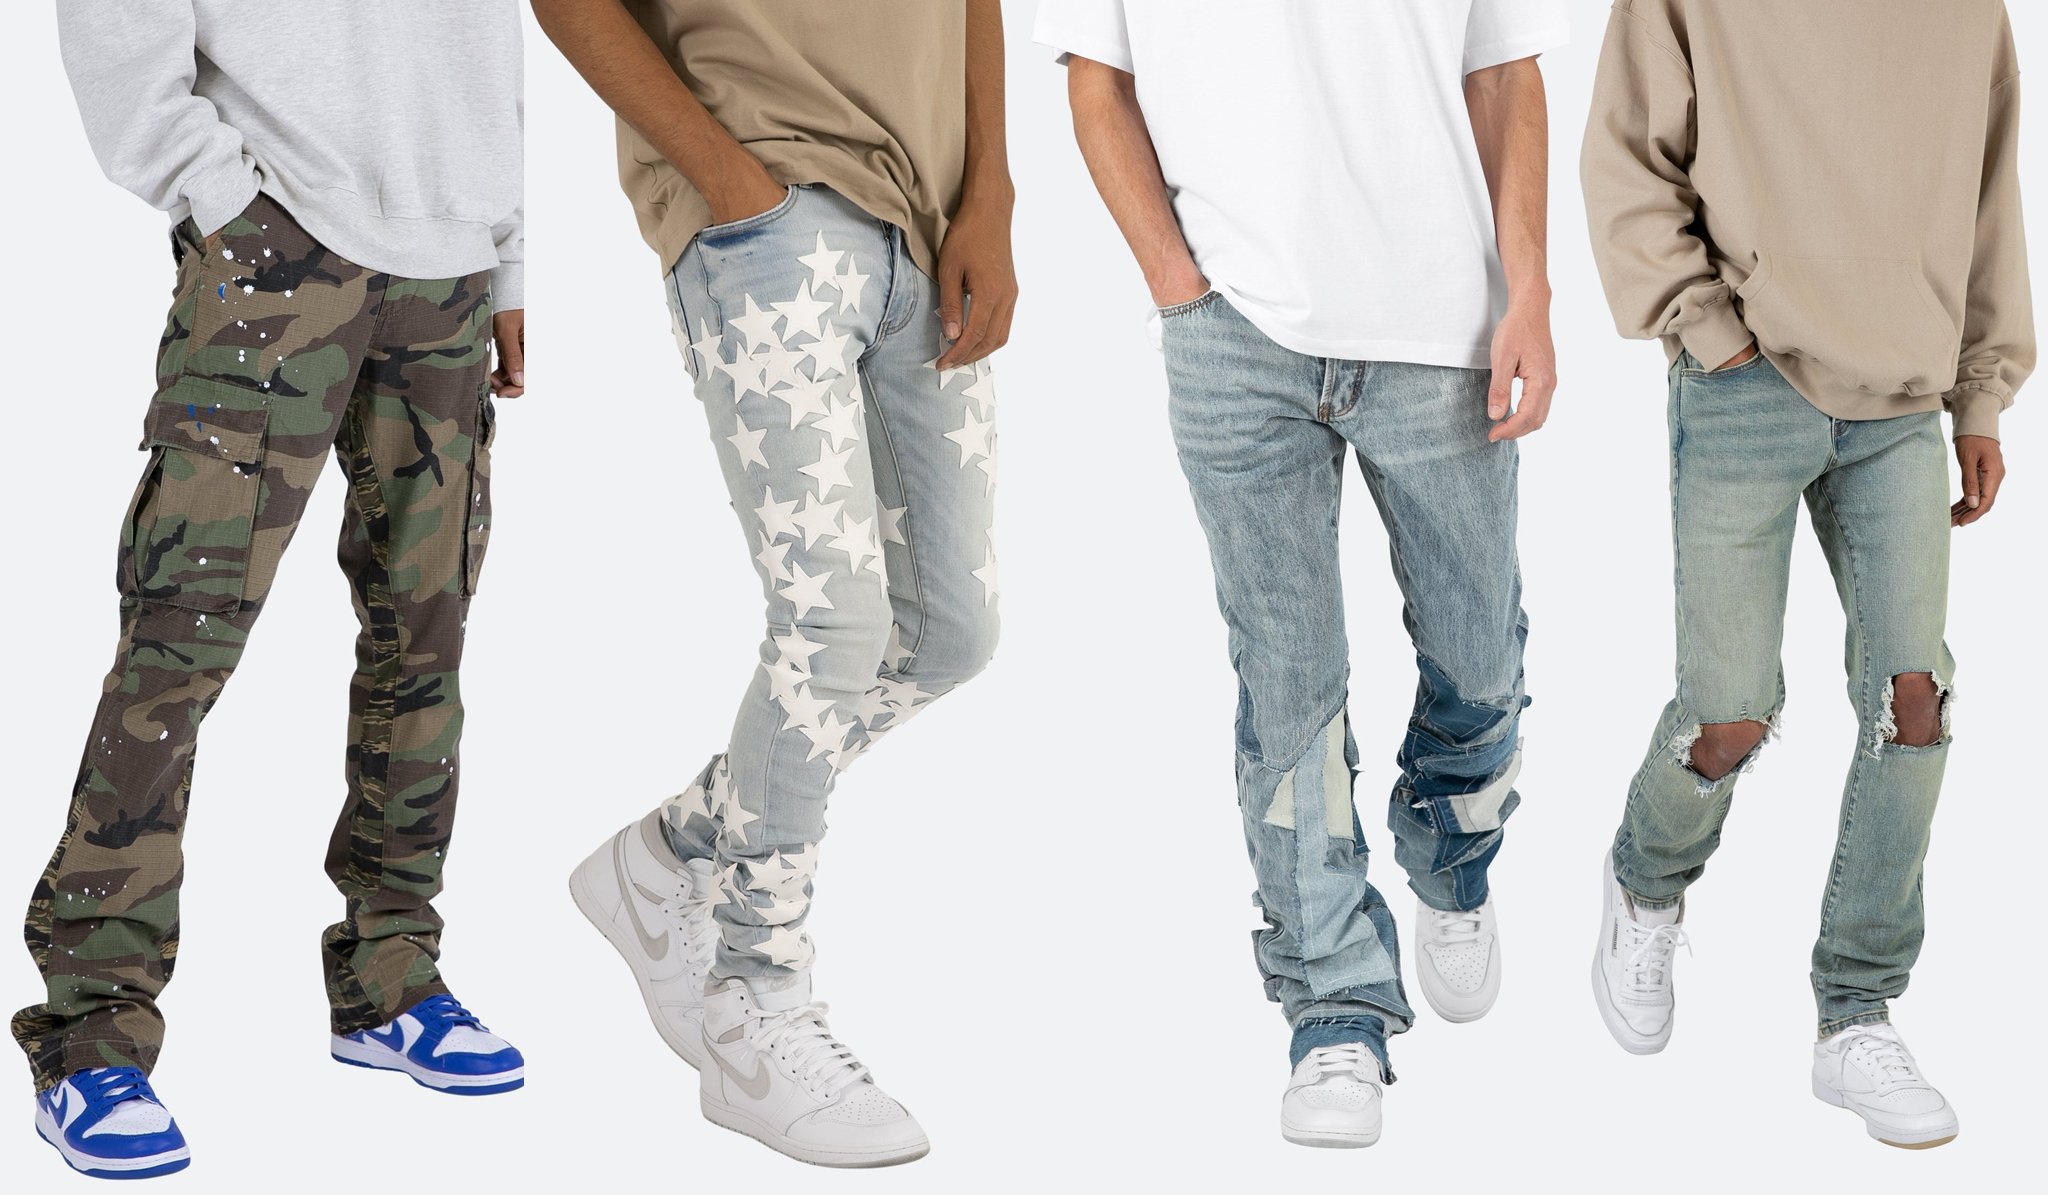 MNML is known for its contemporary streetwear styles, often incorporating camo, graphics, and light distressing